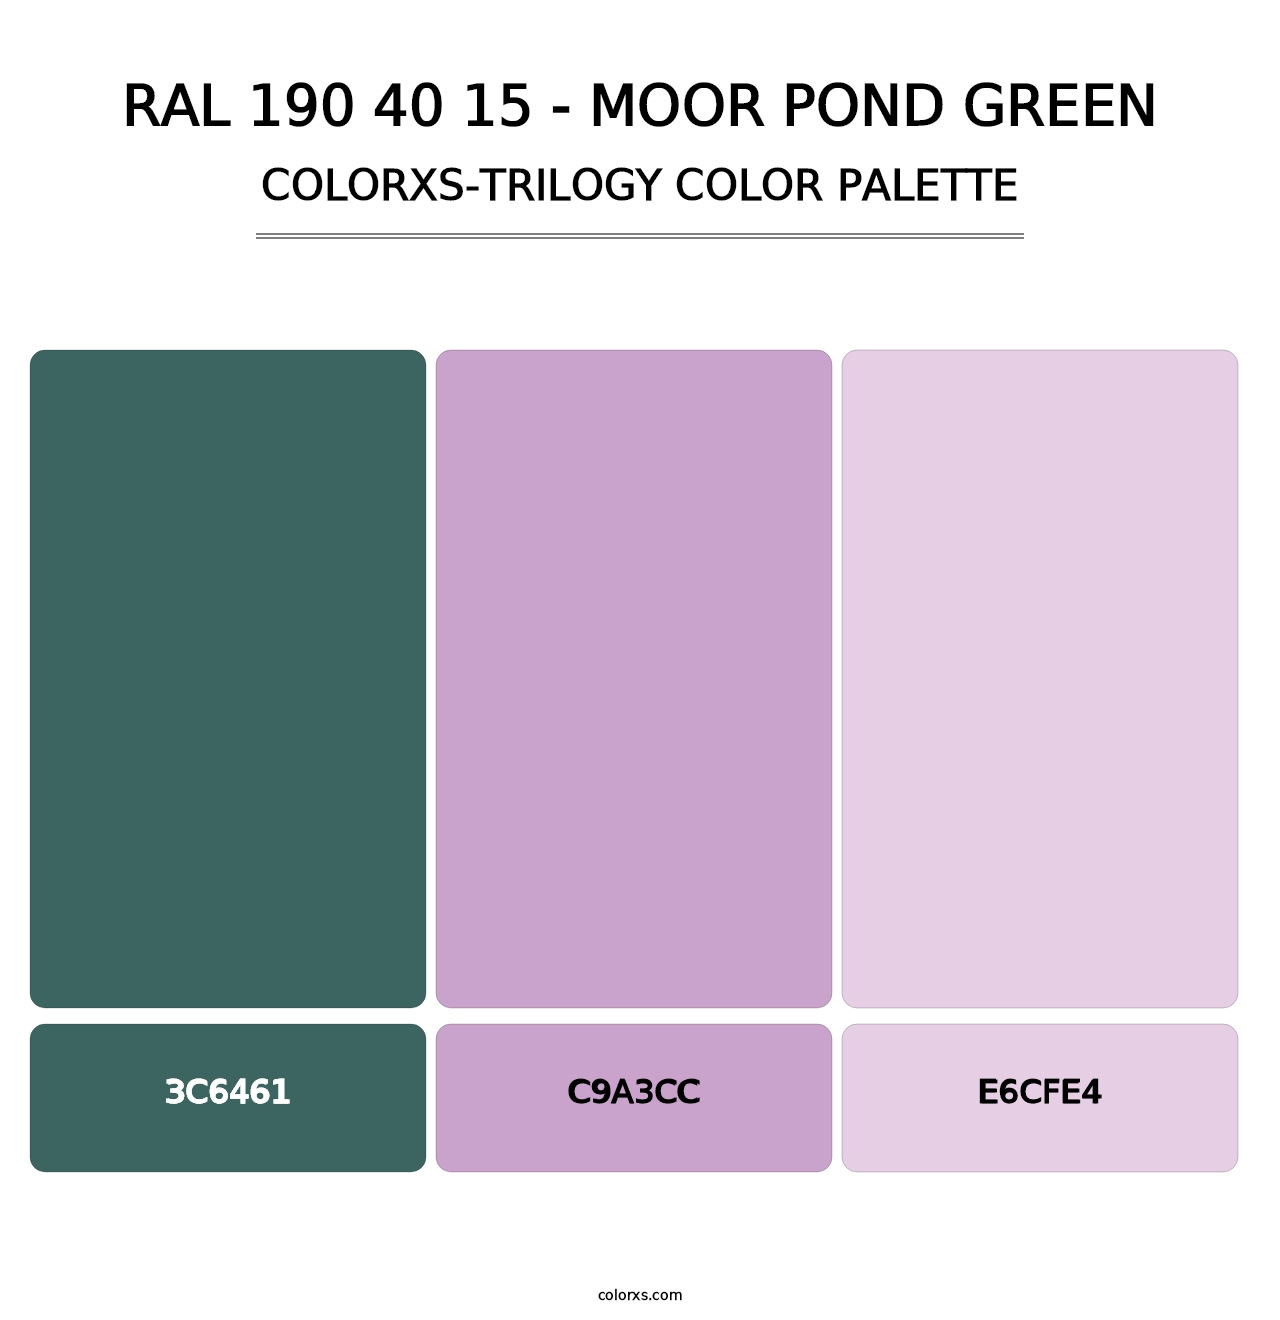 RAL 190 40 15 - Moor Pond Green - Colorxs Trilogy Palette